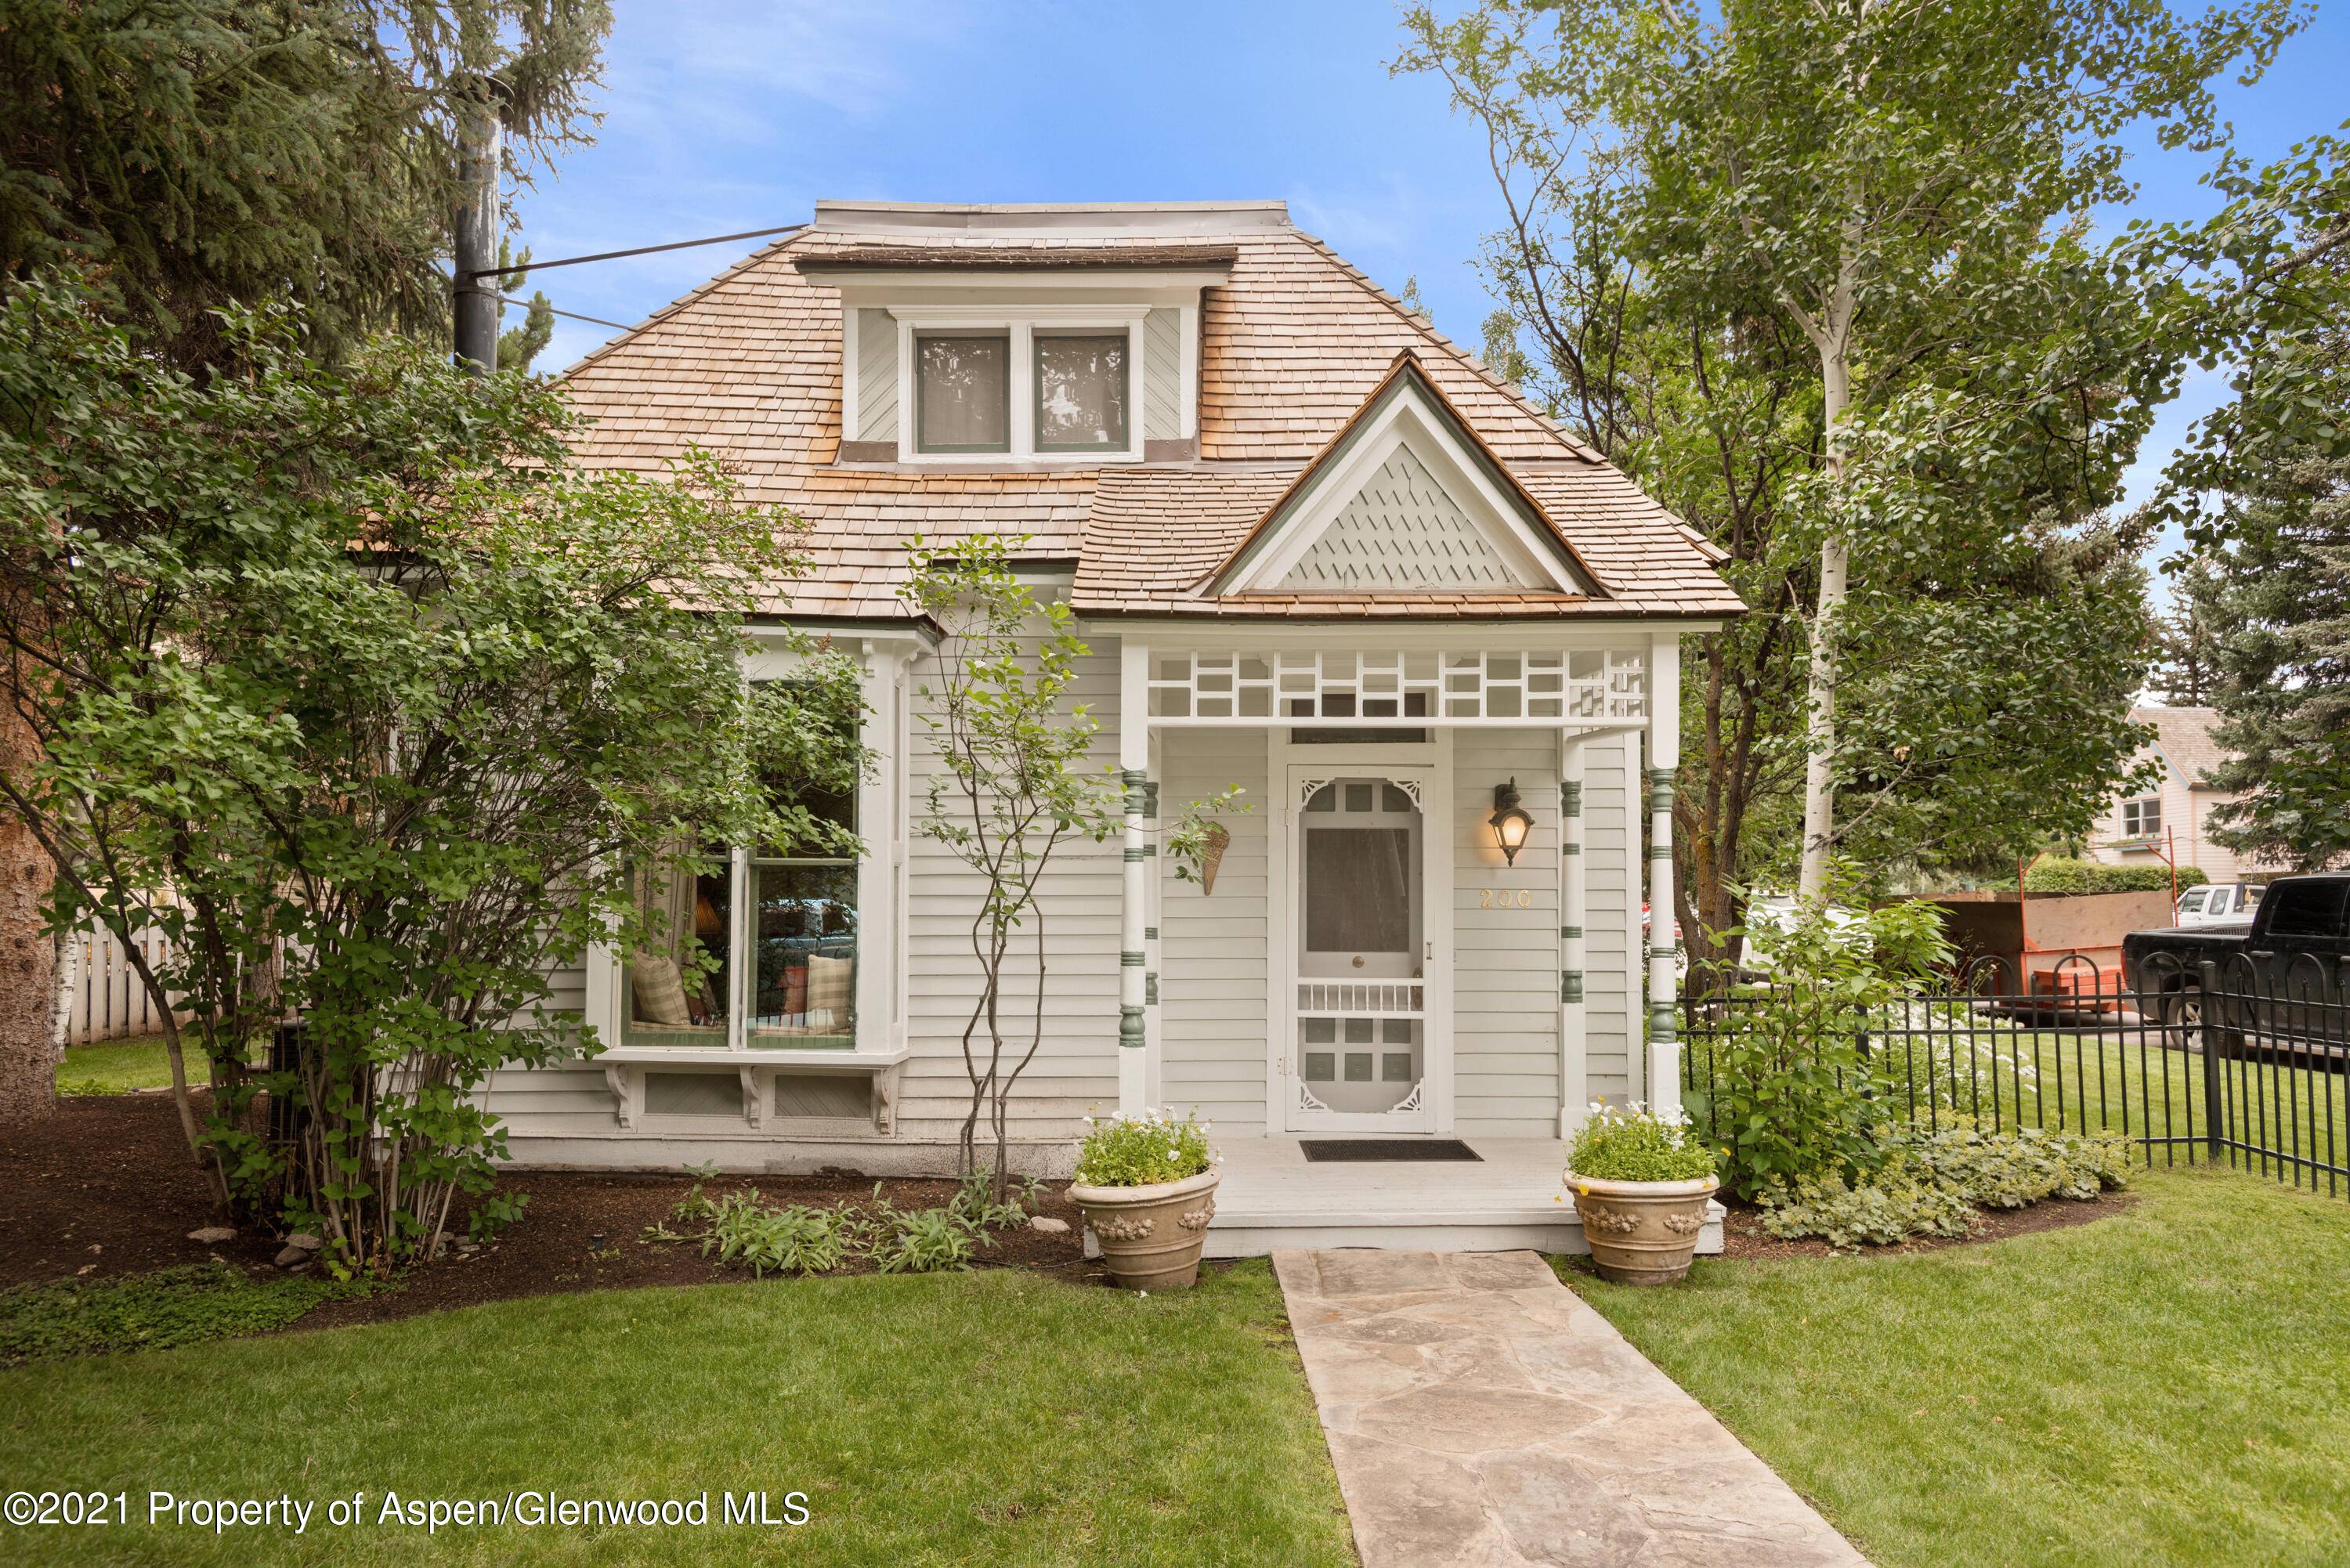 Enjoy the central location of this historic Aspen Victorian.